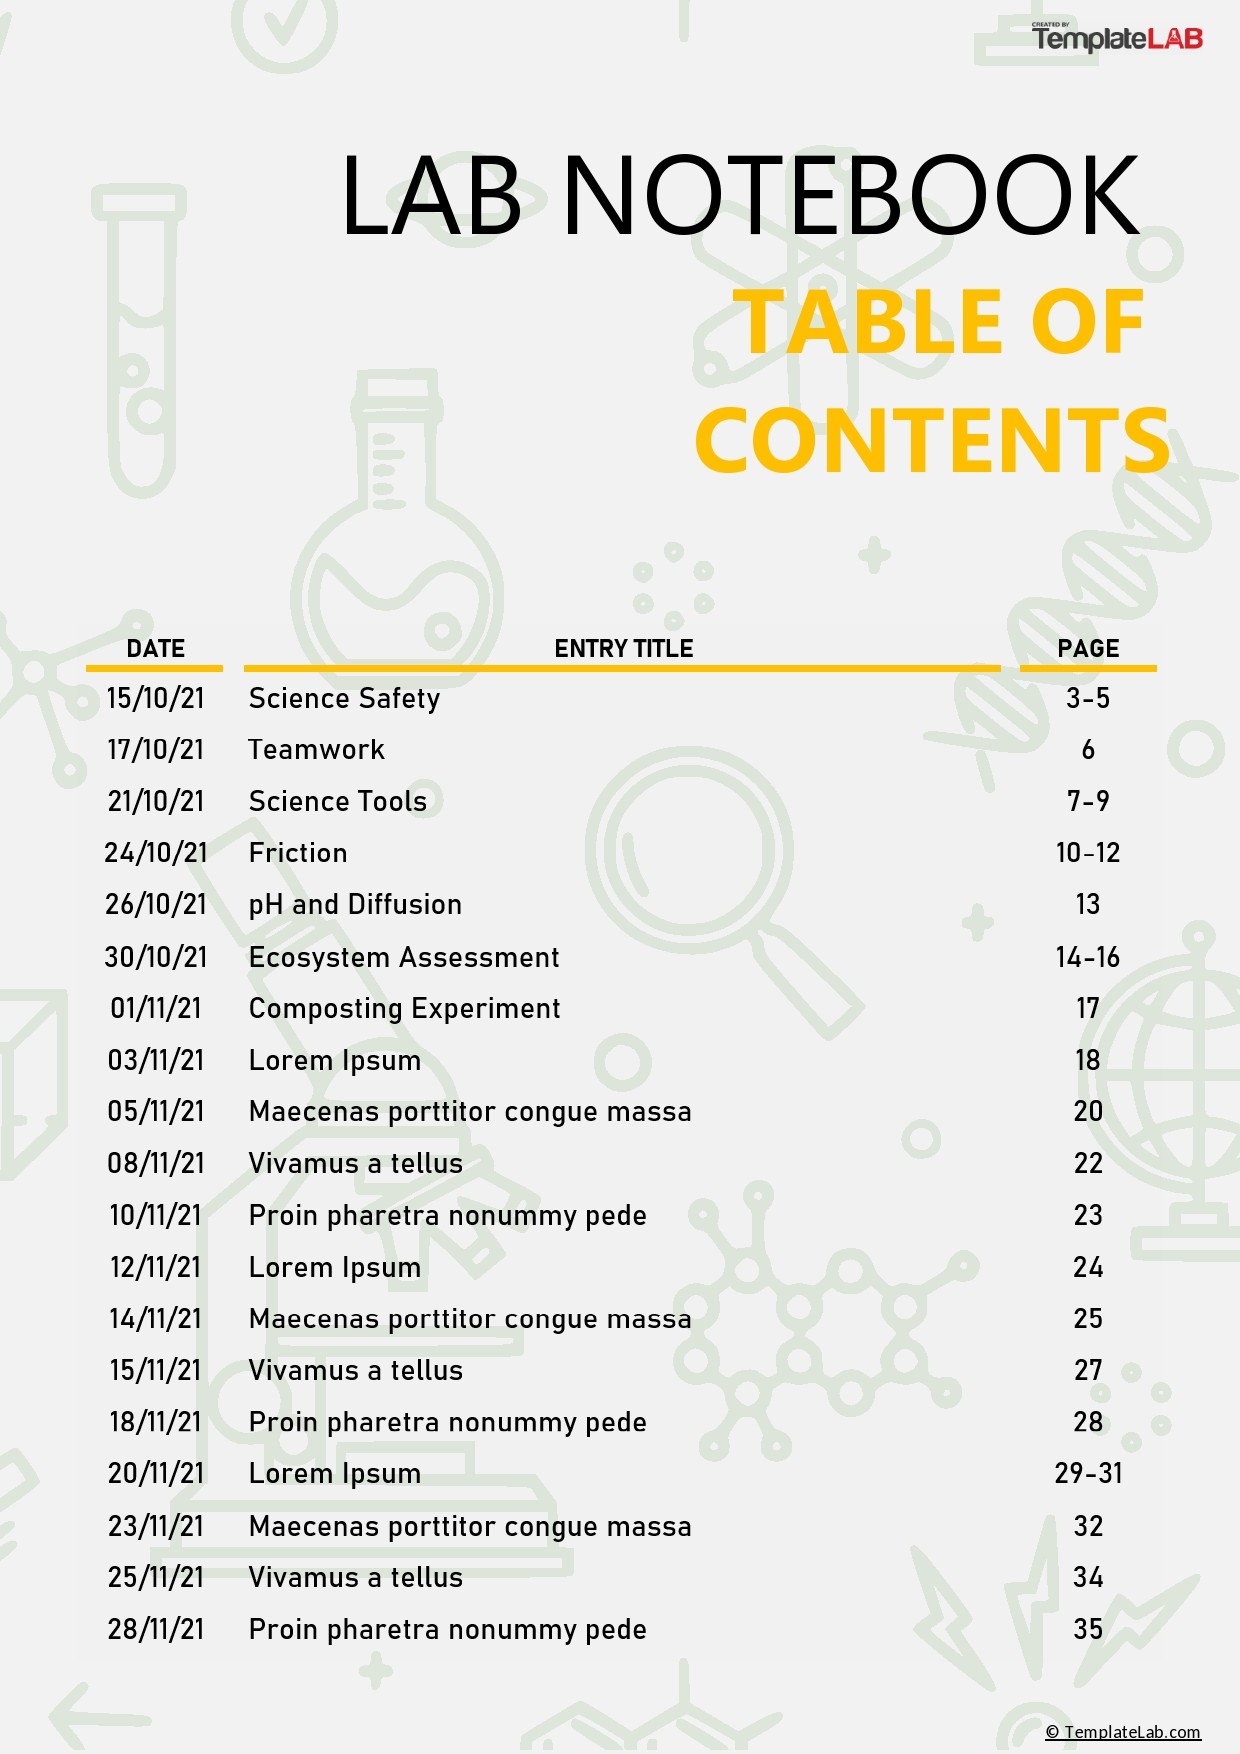 Free Lab Notebook Table of Contents